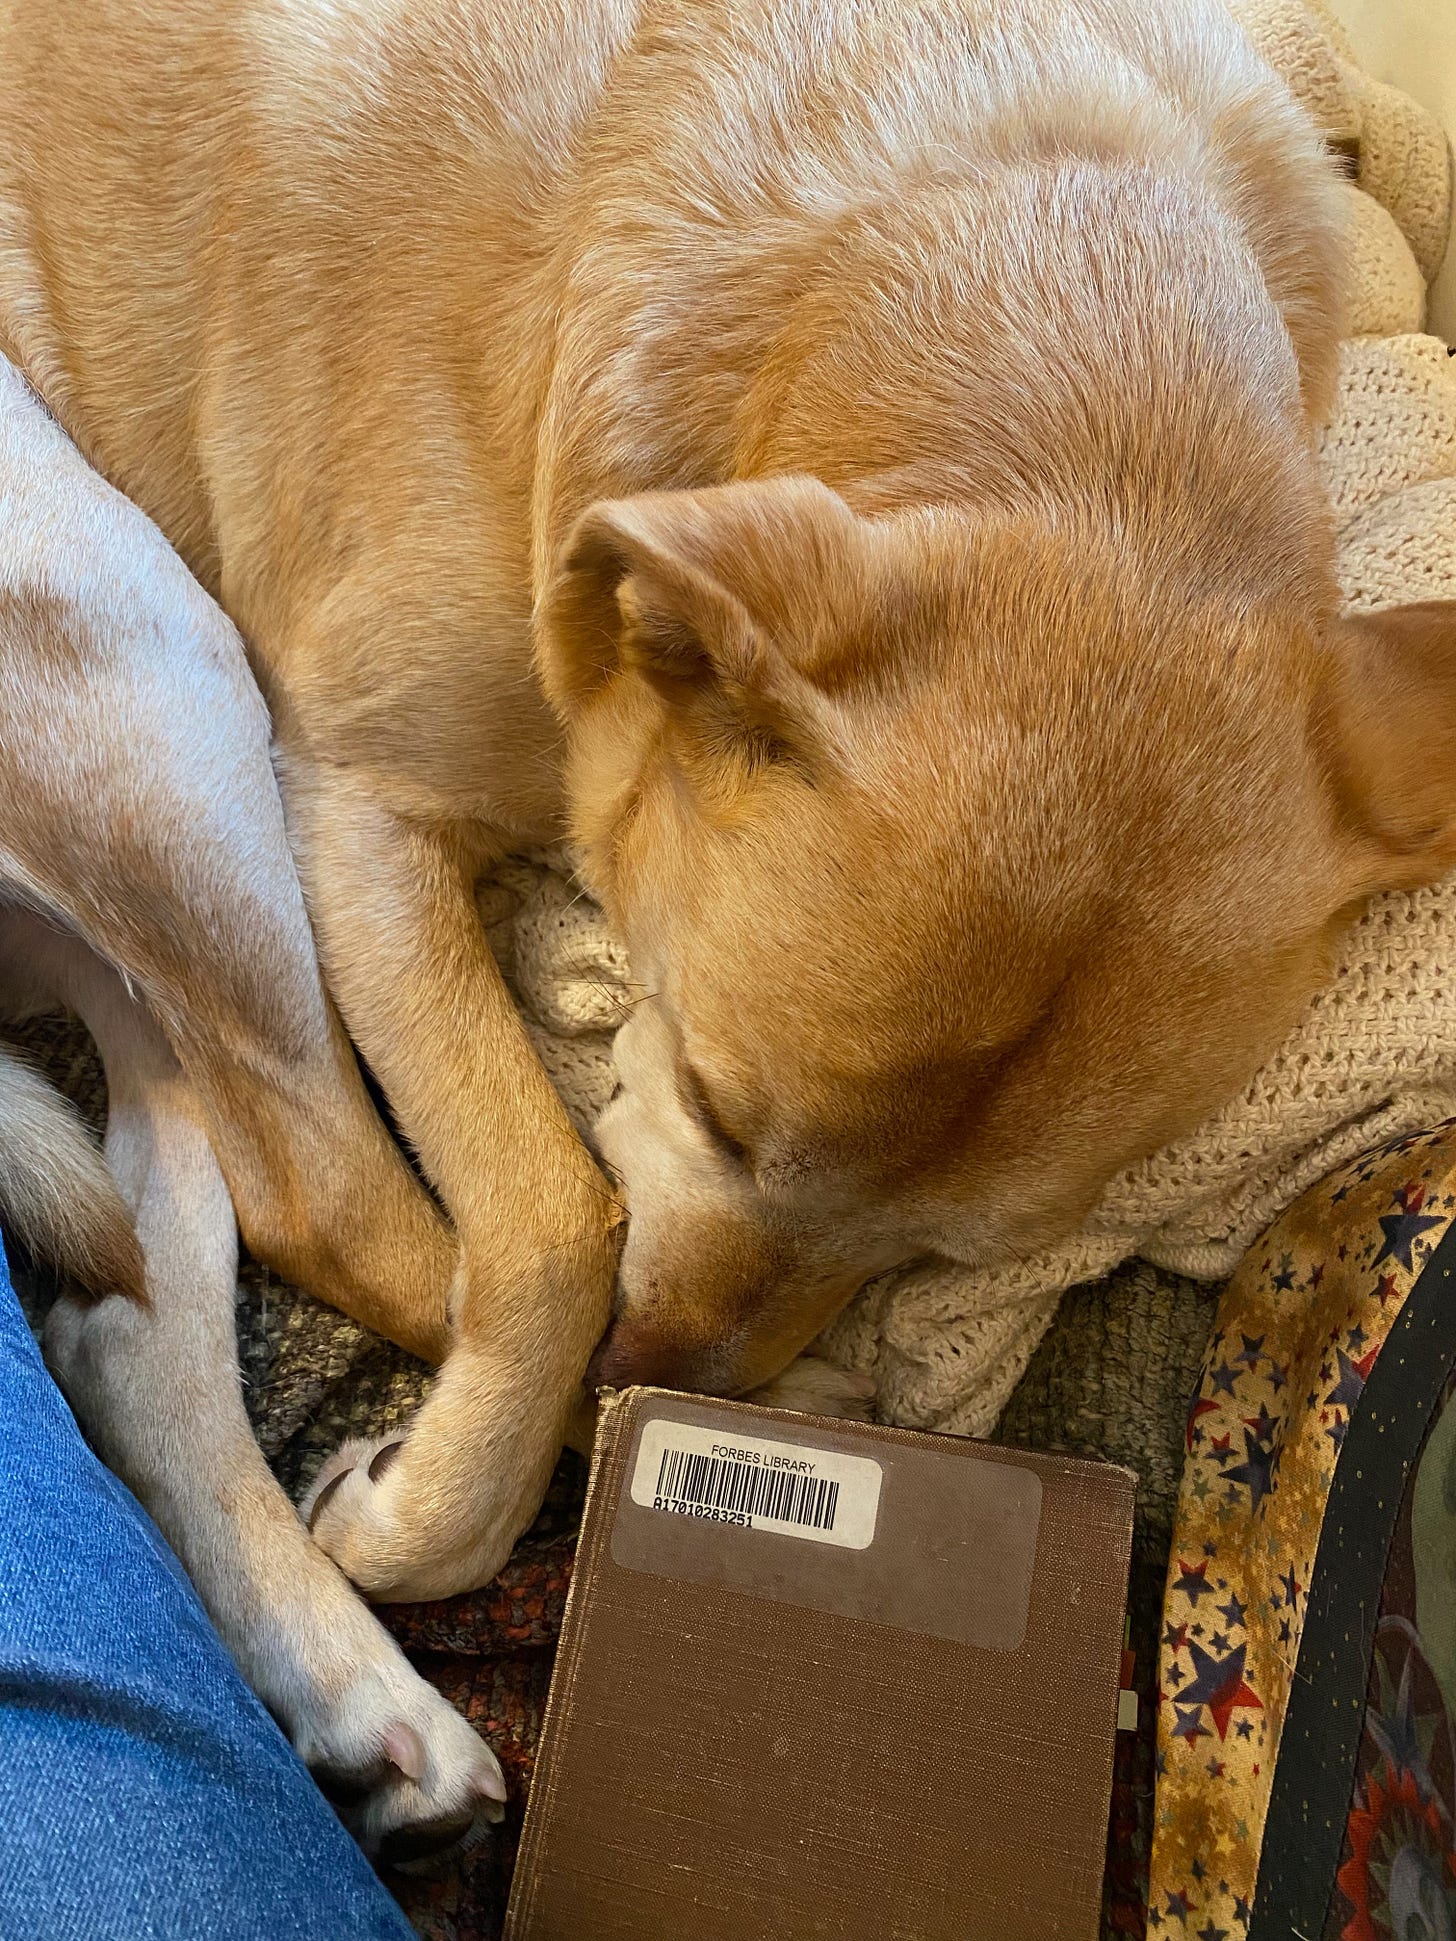 My dog Nessa curled up on a couch, her nose just touching the corner of Quicksand, a plain brown book with a library barcode and a worn spine.